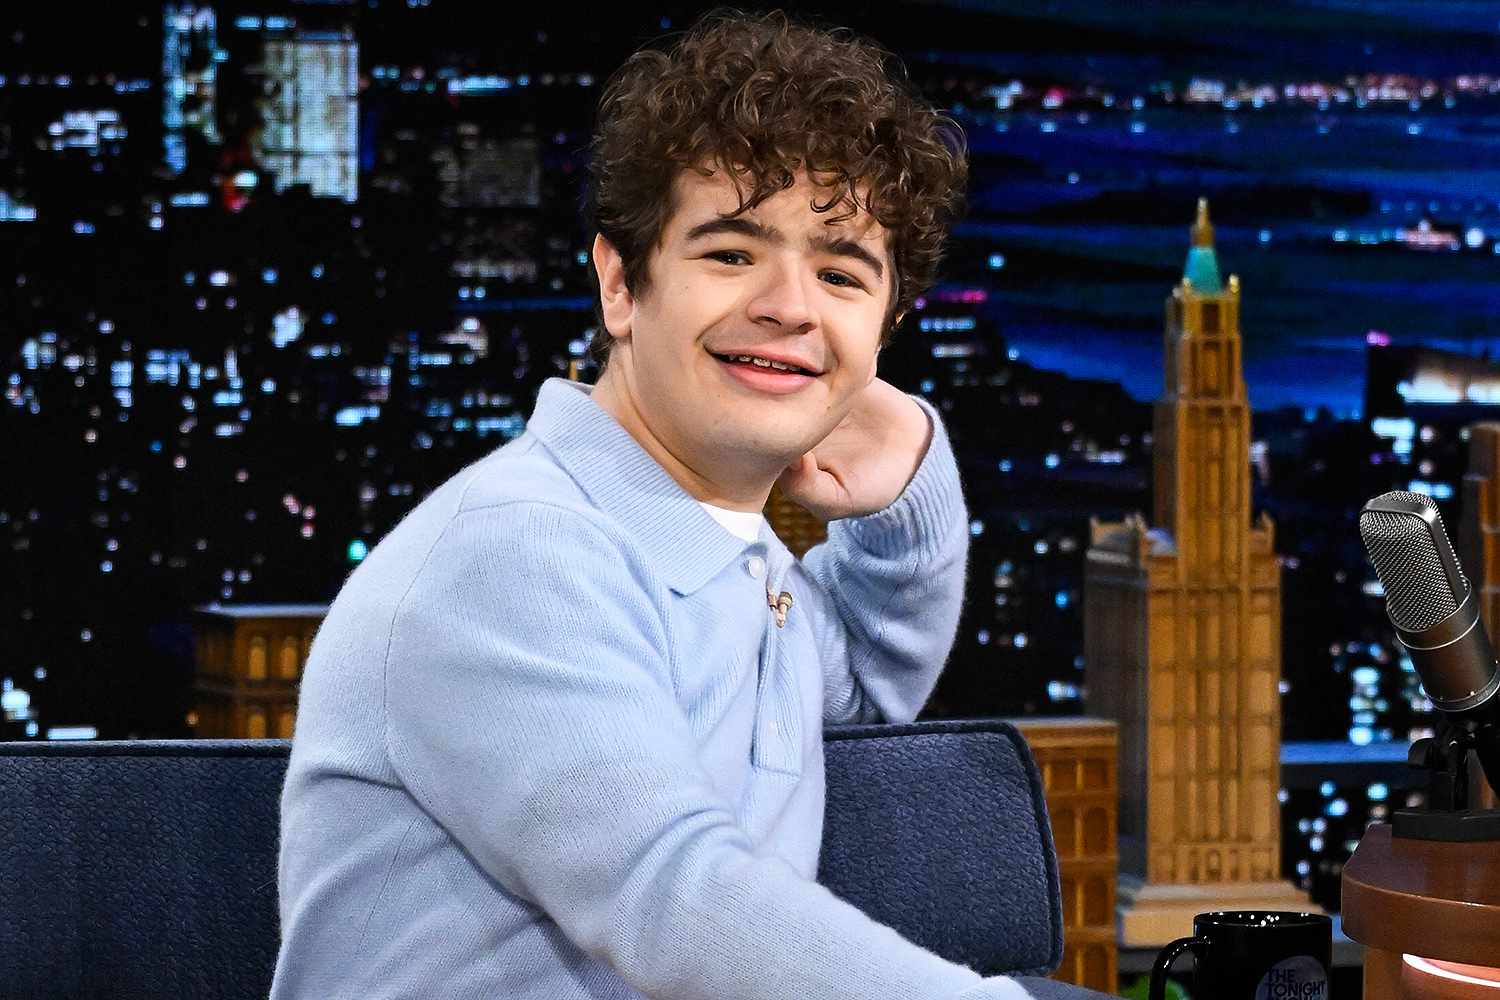 Gaten Matarazzo Spotted Filming Final Season Of “Stranger Things” Looking All Grown Up